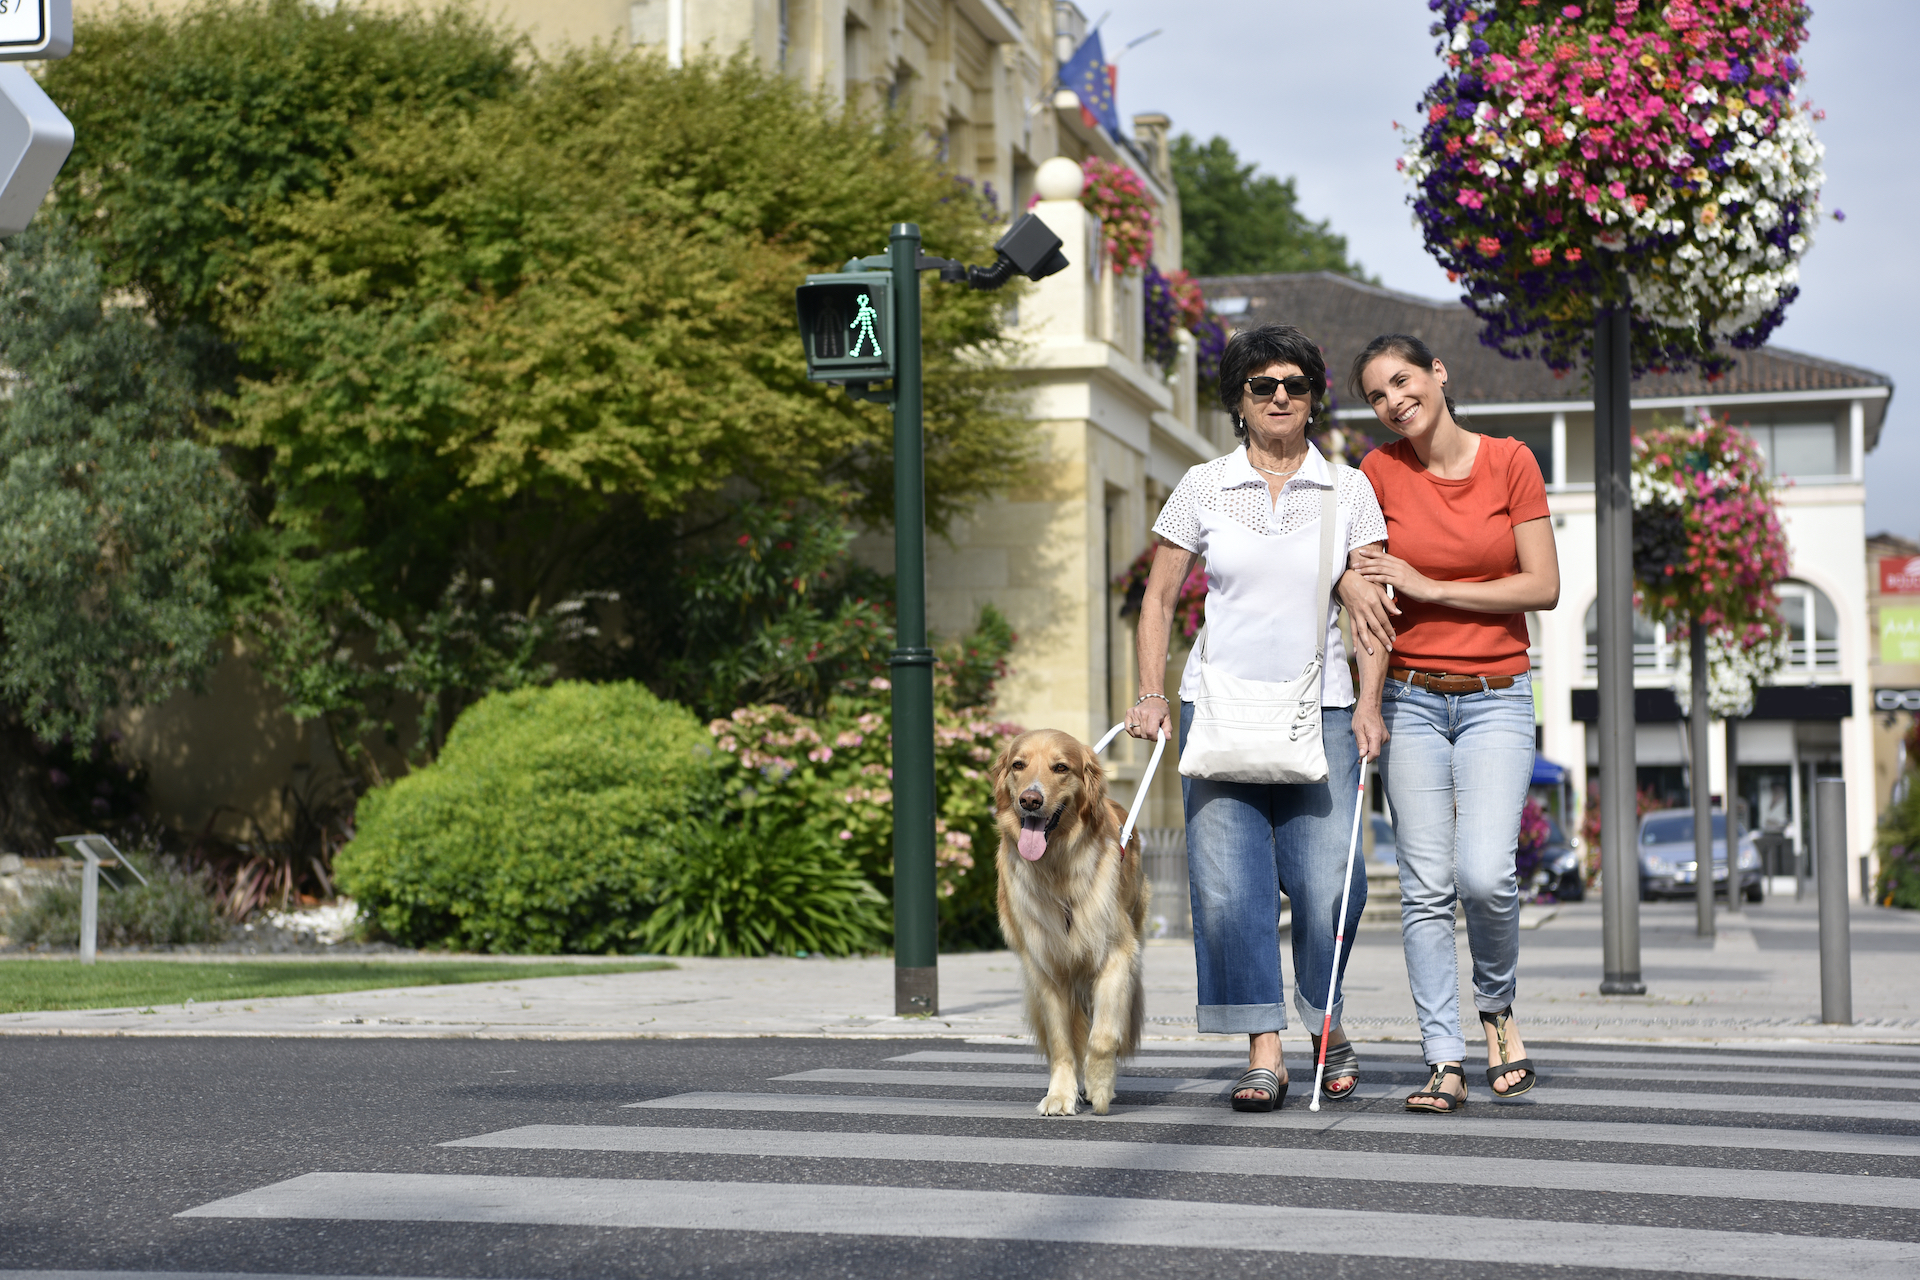 Friends crossing the street; one walks with a white cane and a guide dog